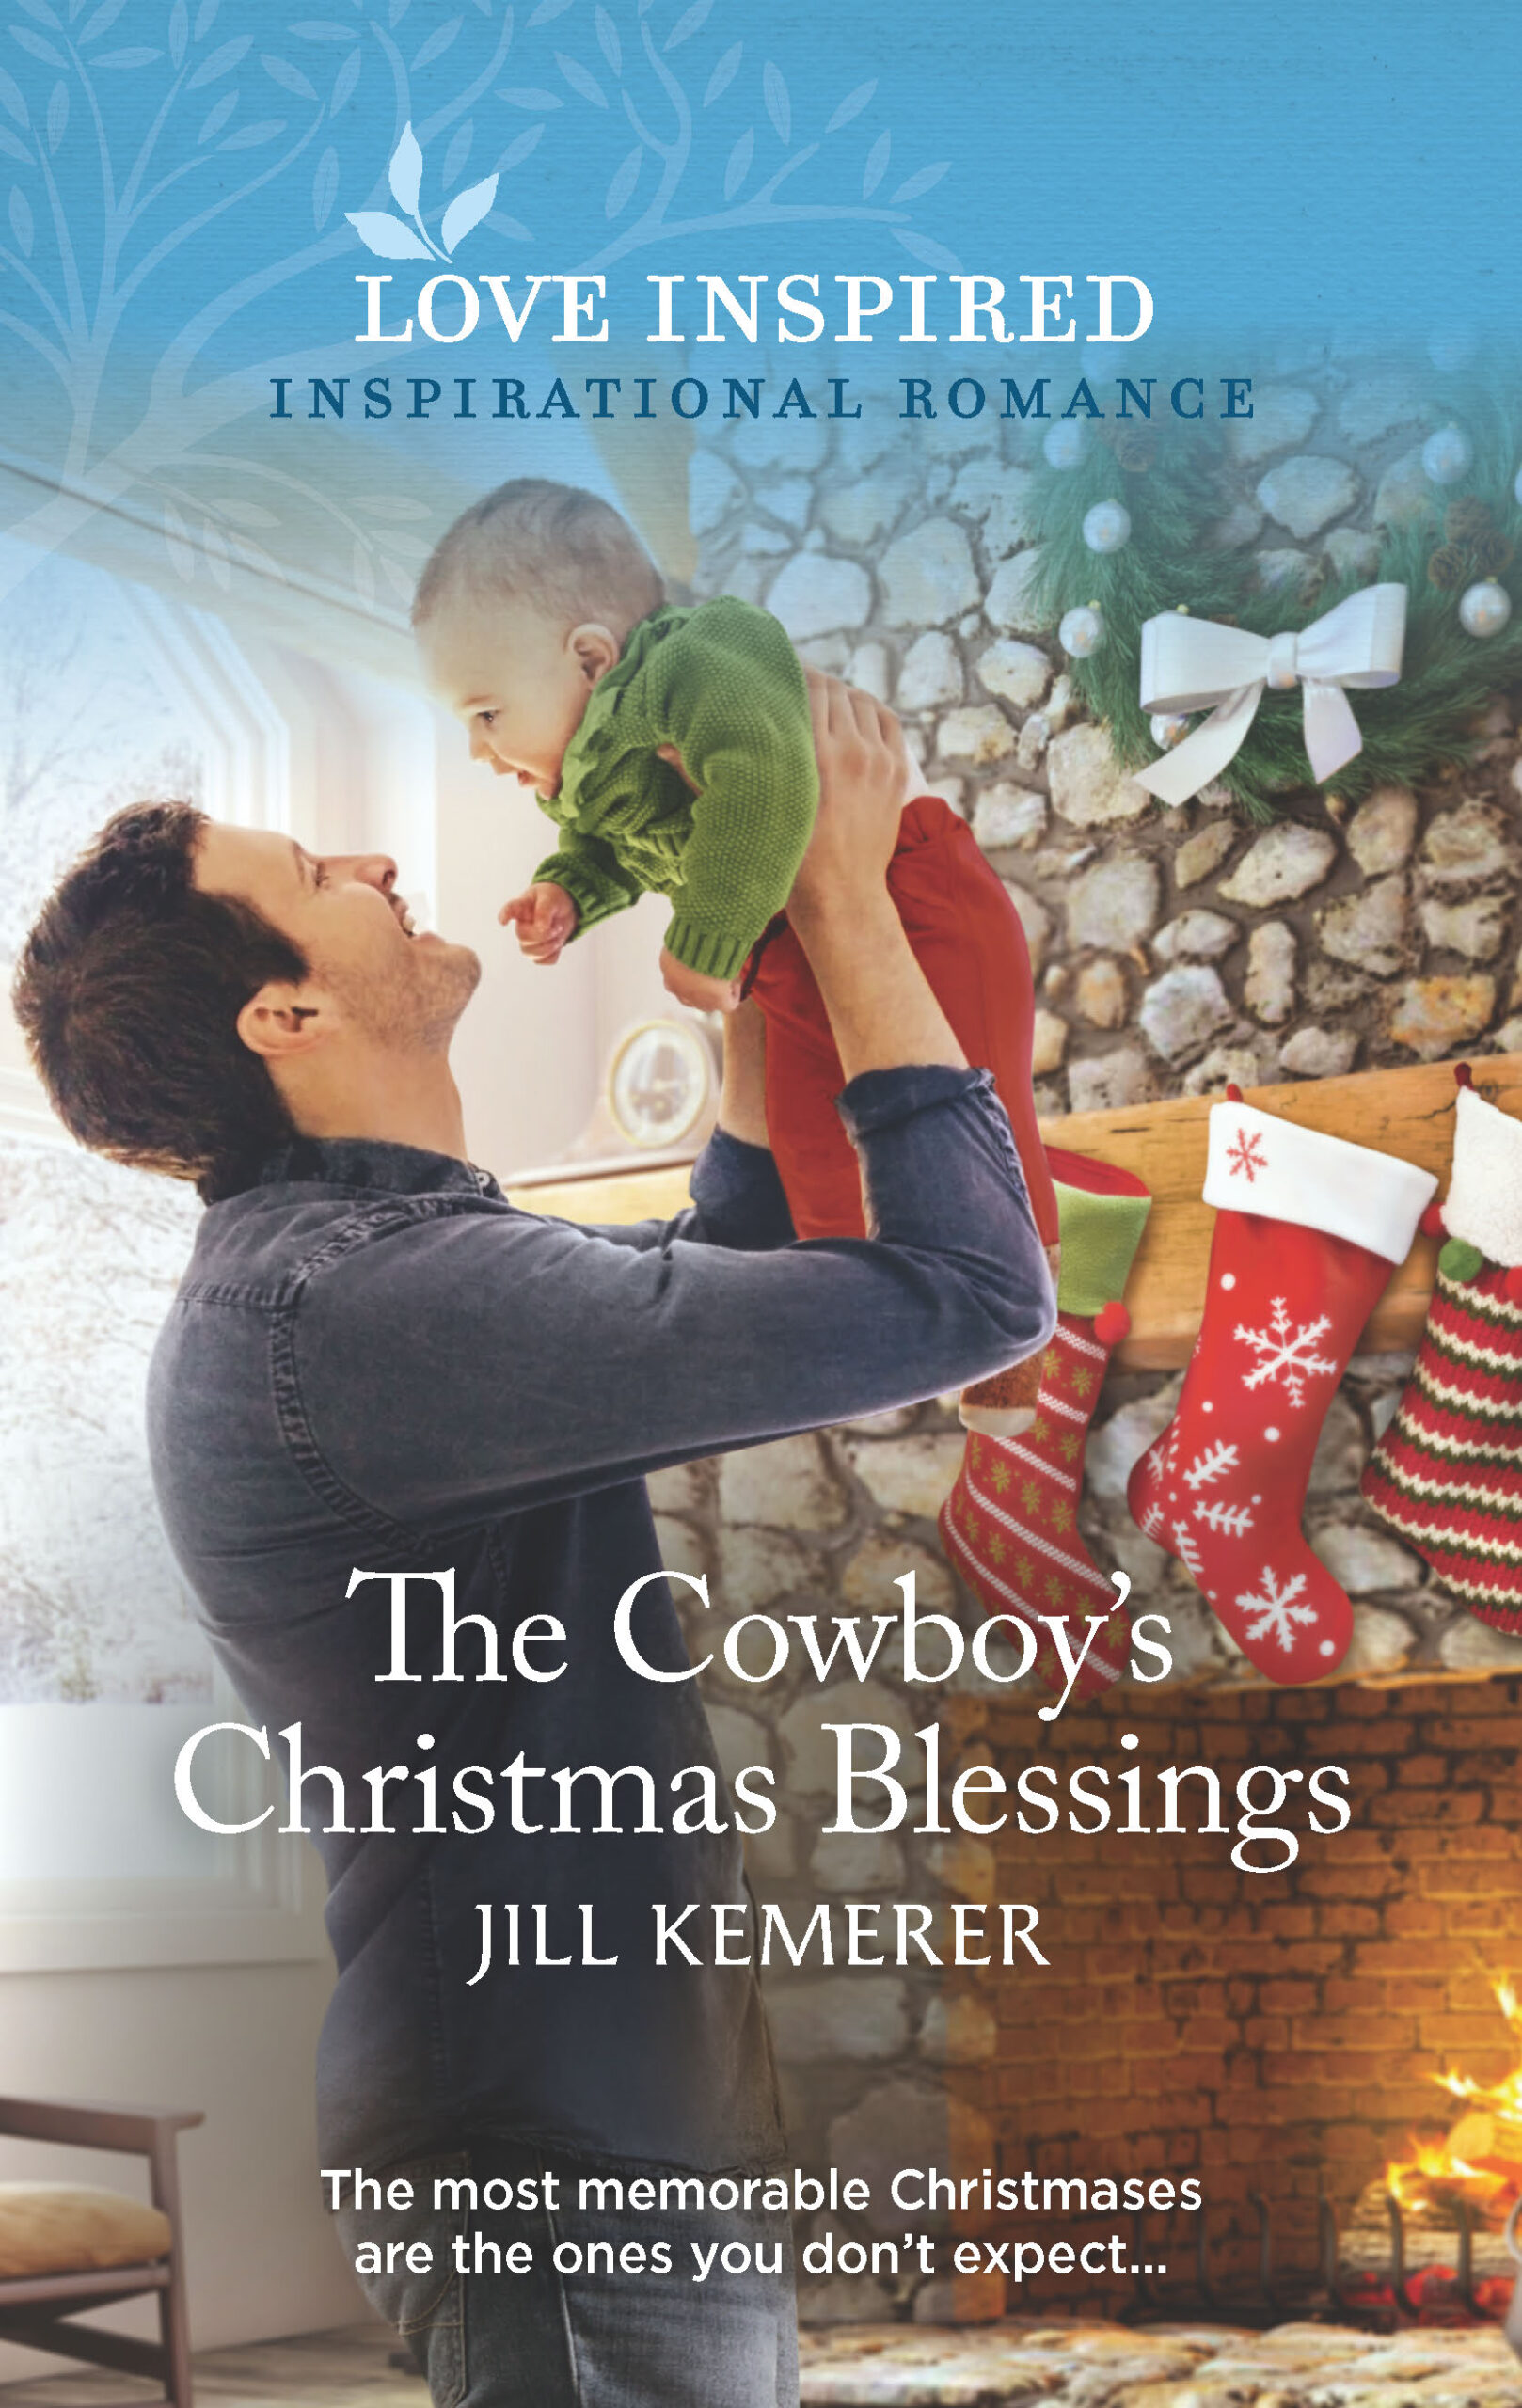 The Cowboy's Christmas Blessings. Book 3 in Wyoming Sweethearts by Jill Kemerer